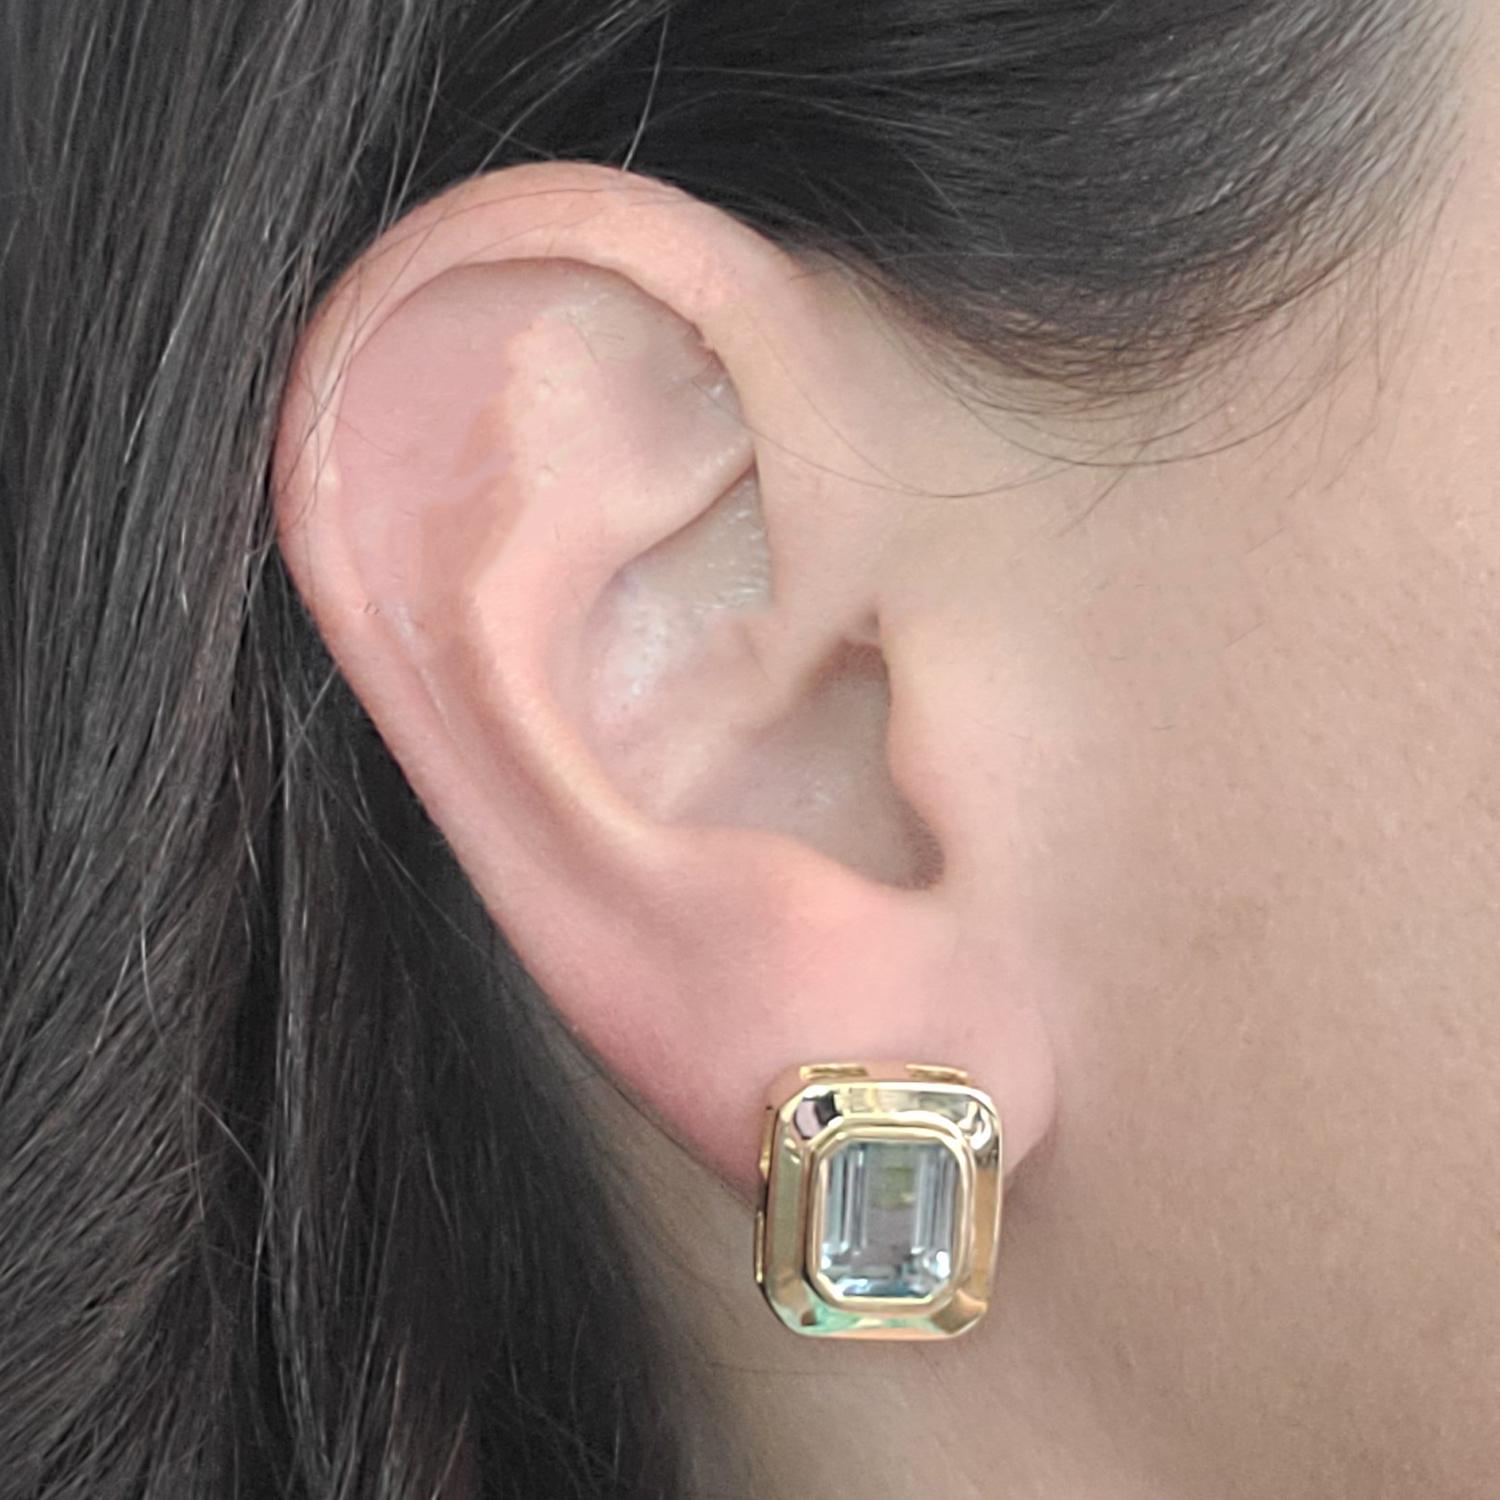 14 Karat Yellow Gold Earrings Featuring 2 Bezel Set Emerald Cut Blue Topaz Measuring 7.5mm x 10mm. Pierced Post with Omega Clip Back. Finished Weight Is 10.0 Grams.